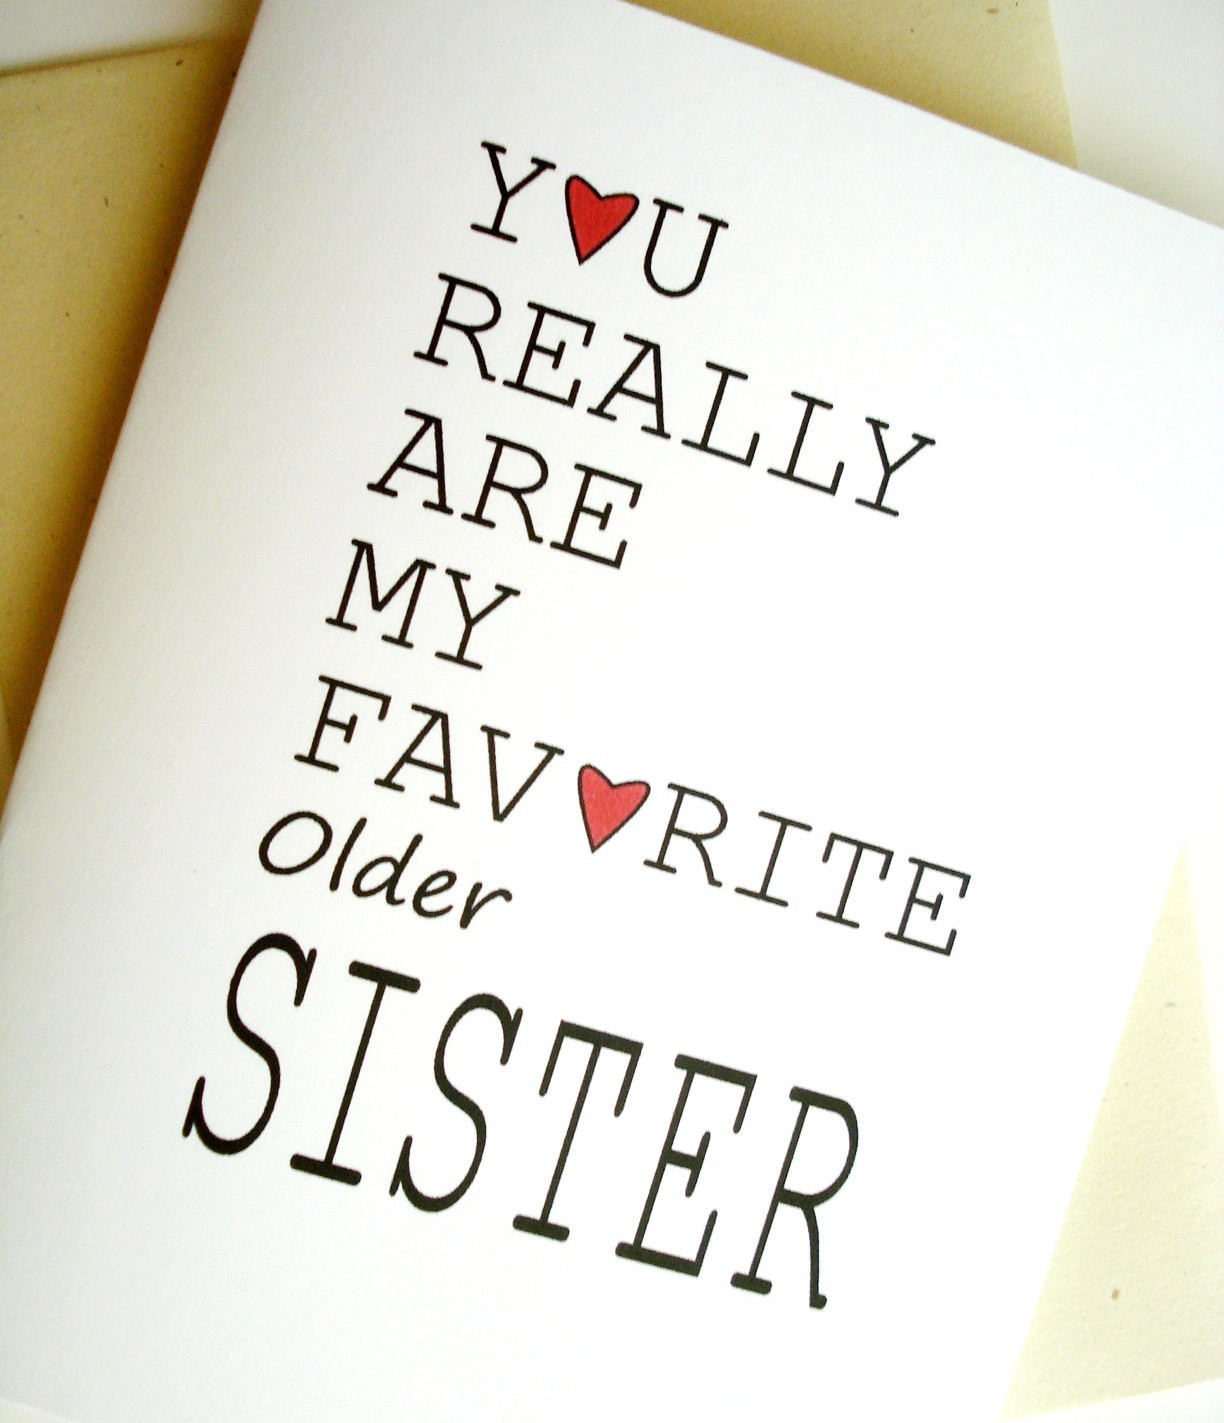 Birthday Wishes For Older Sister
 Favorite Sister Card Birthday Older by lilcubby on Etsy